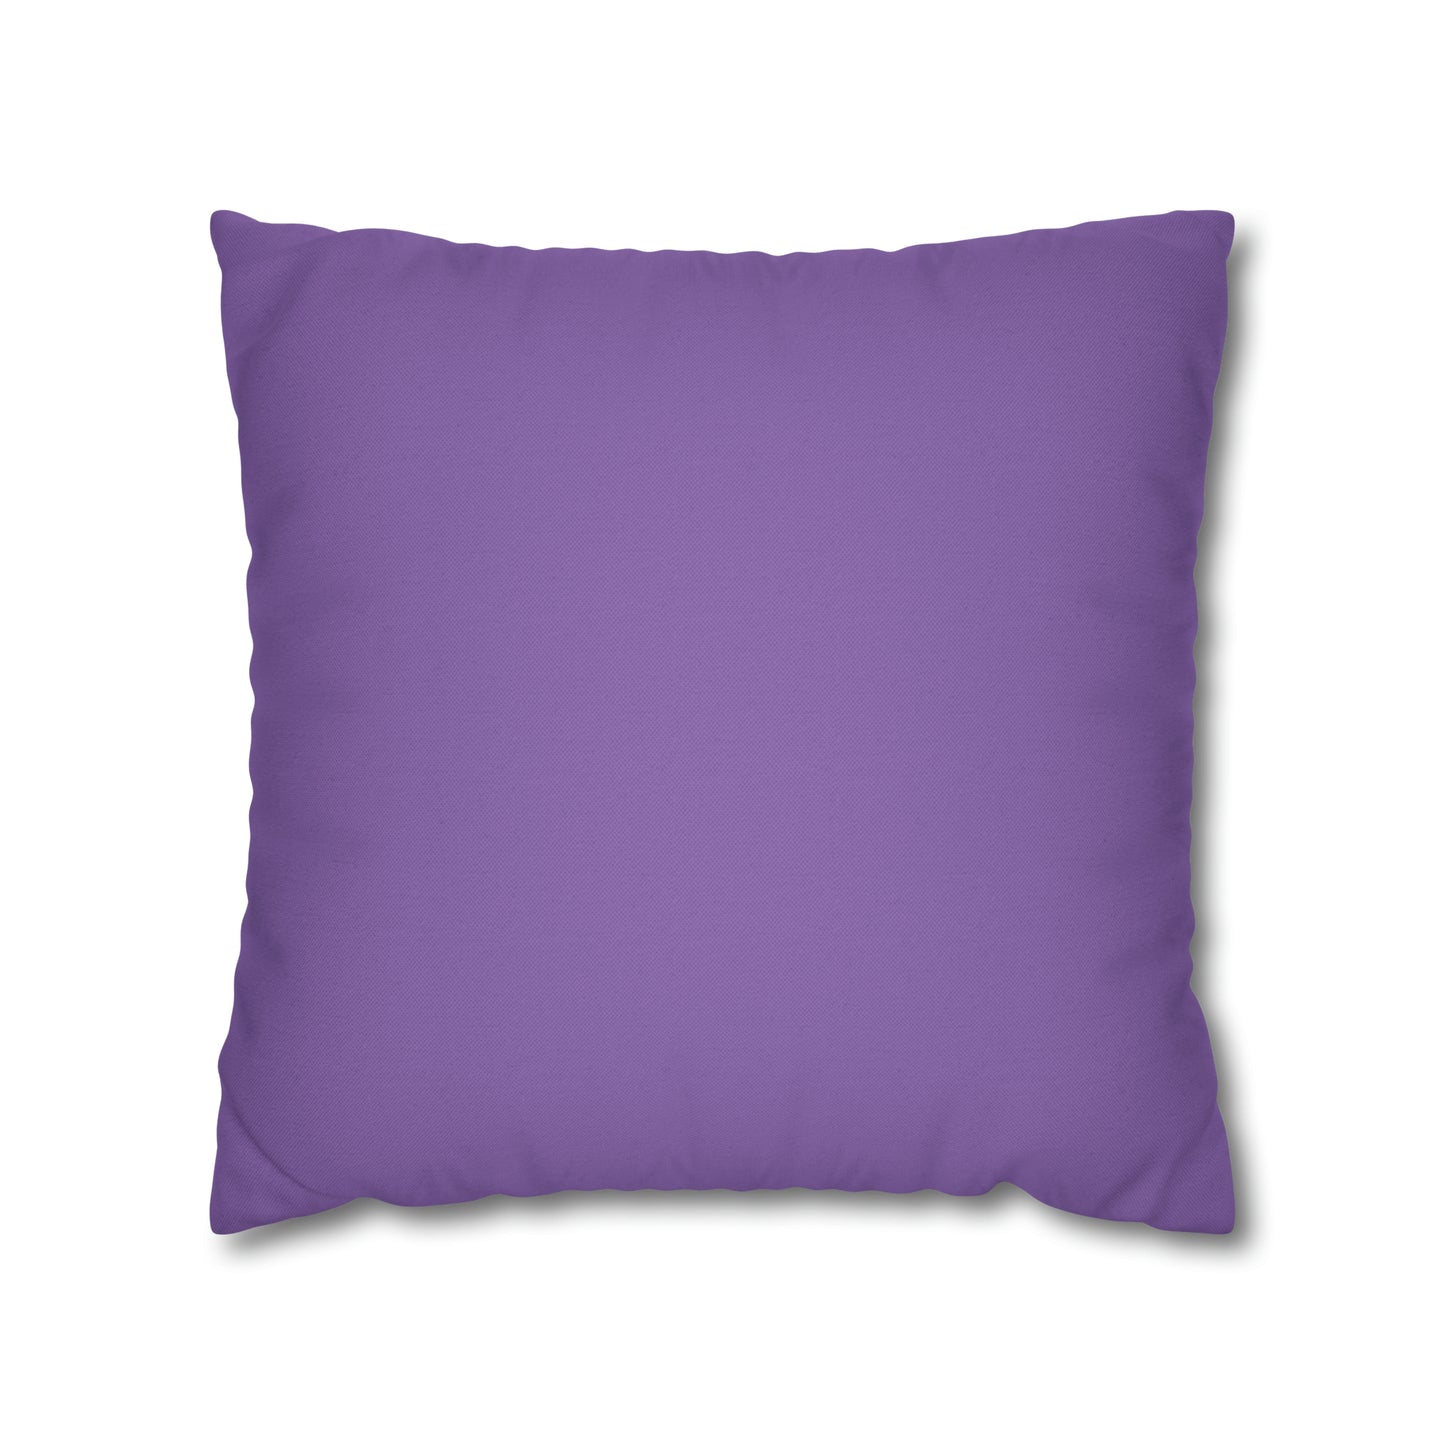 Bueno Aires Cushion Cover